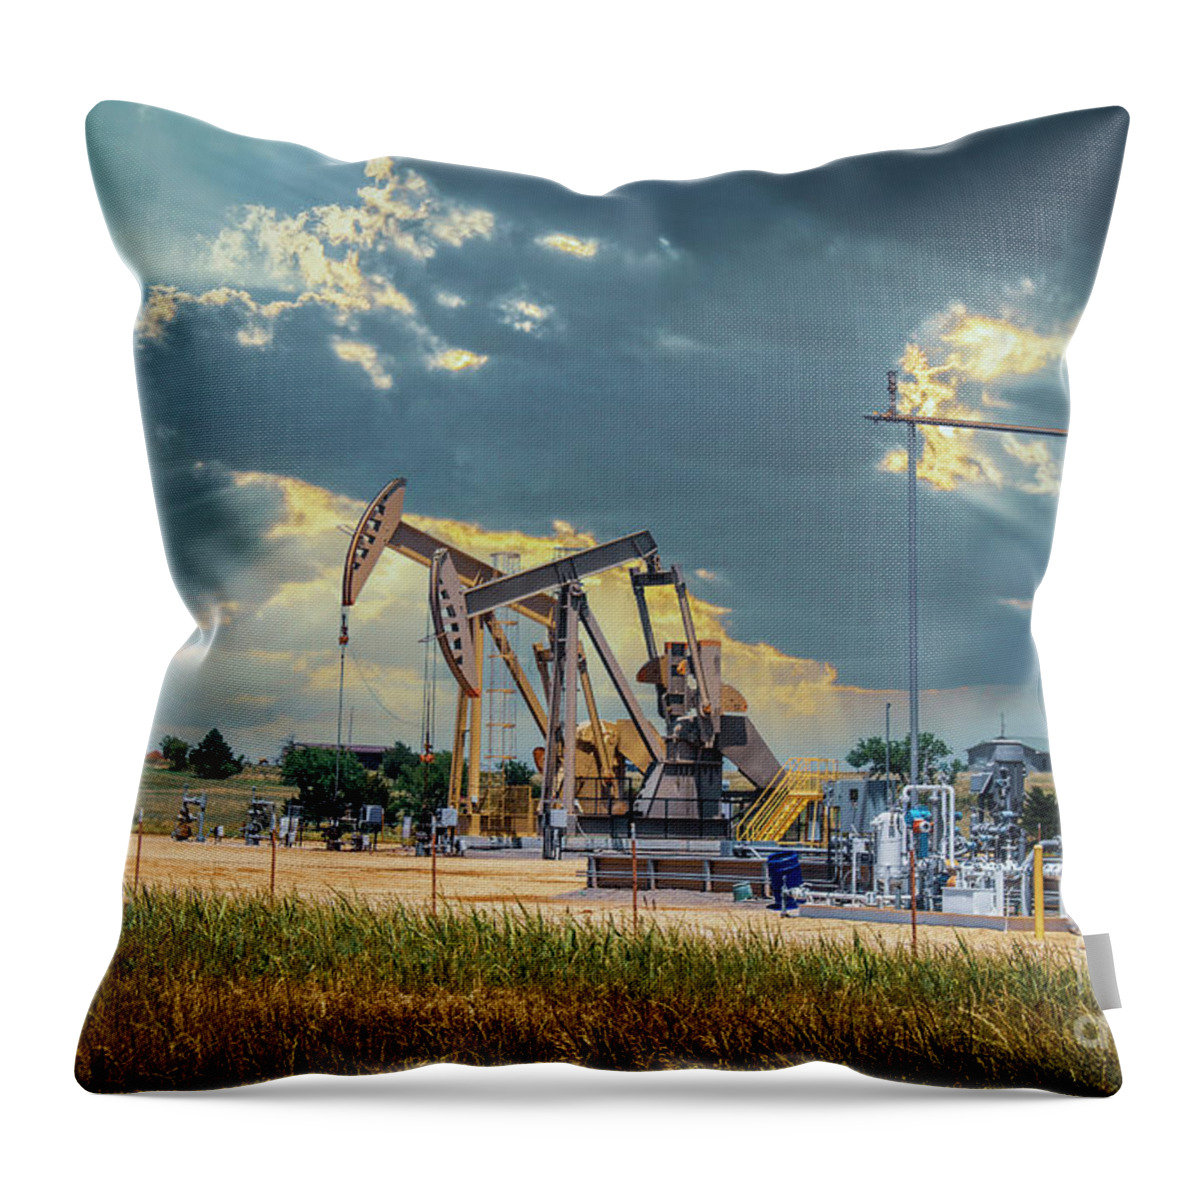 Tanks Throw Pillow featuring the photograph Harvesting Oil by Susan Vineyard